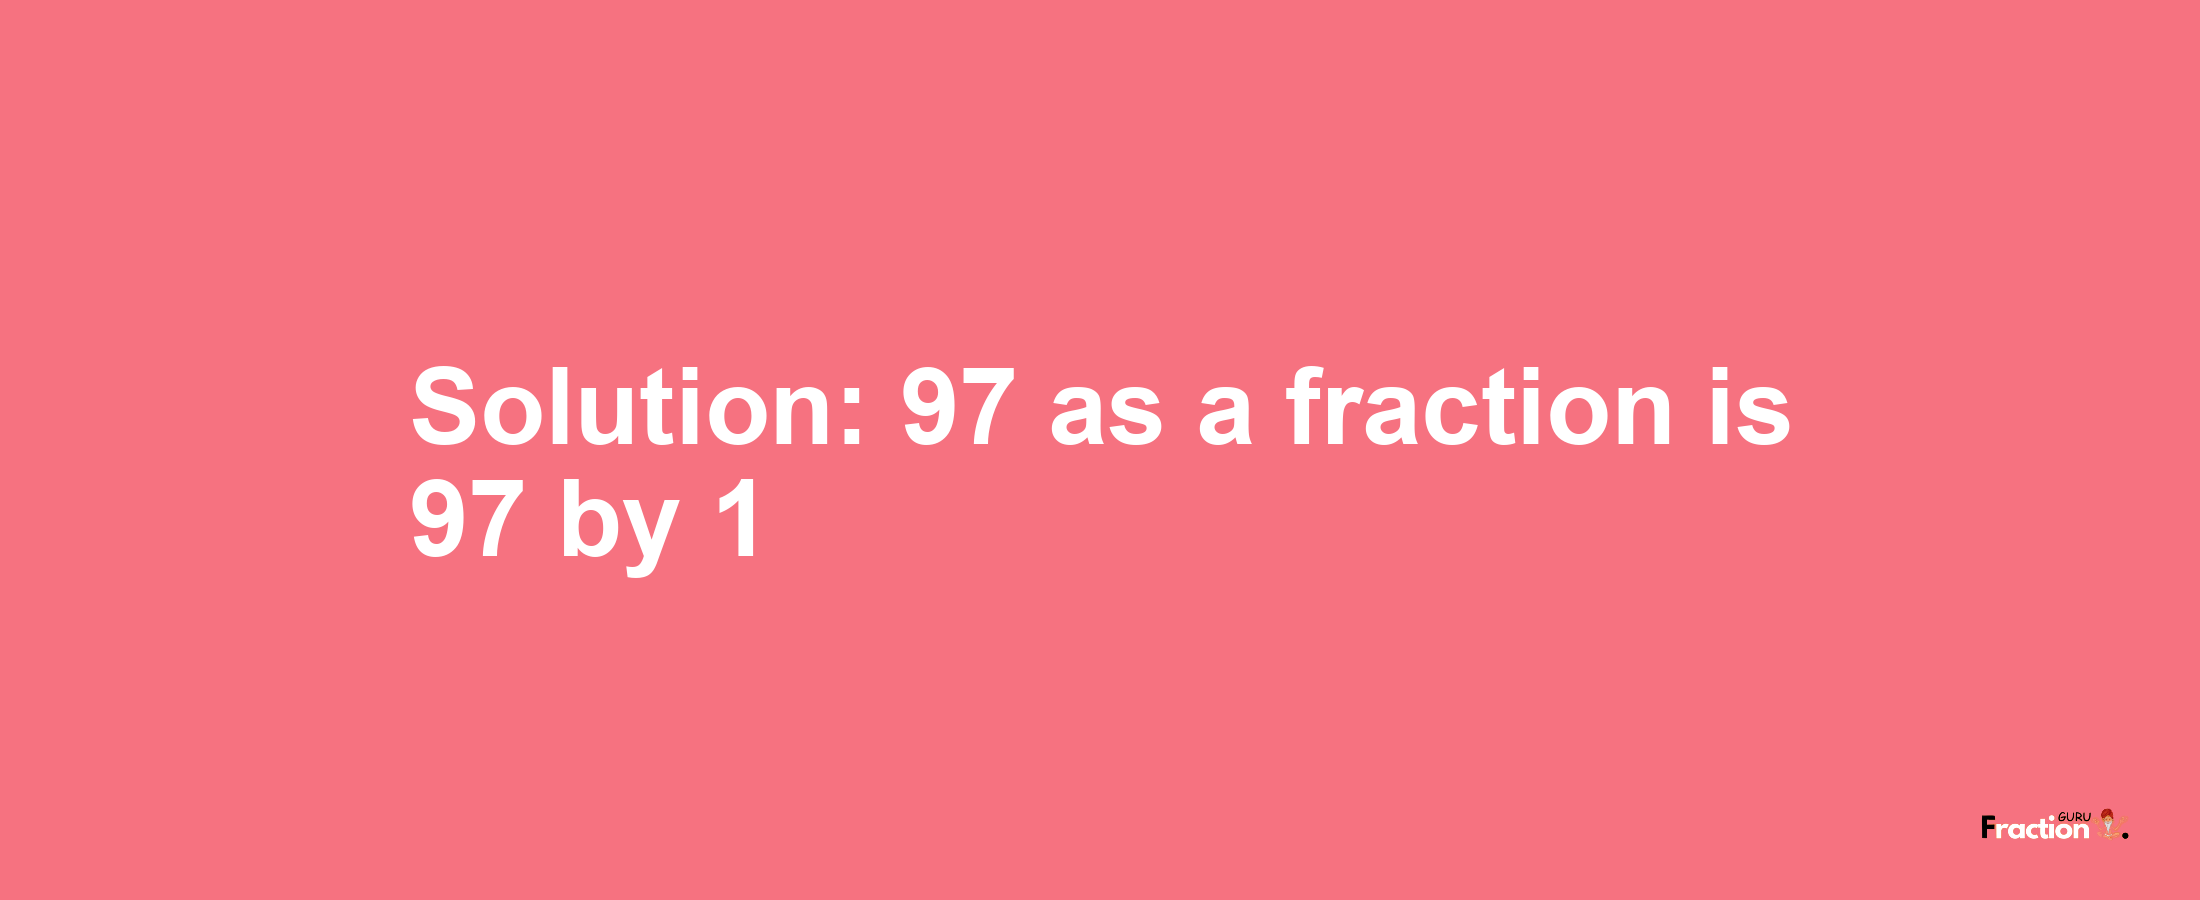 Solution:97 as a fraction is 97/1